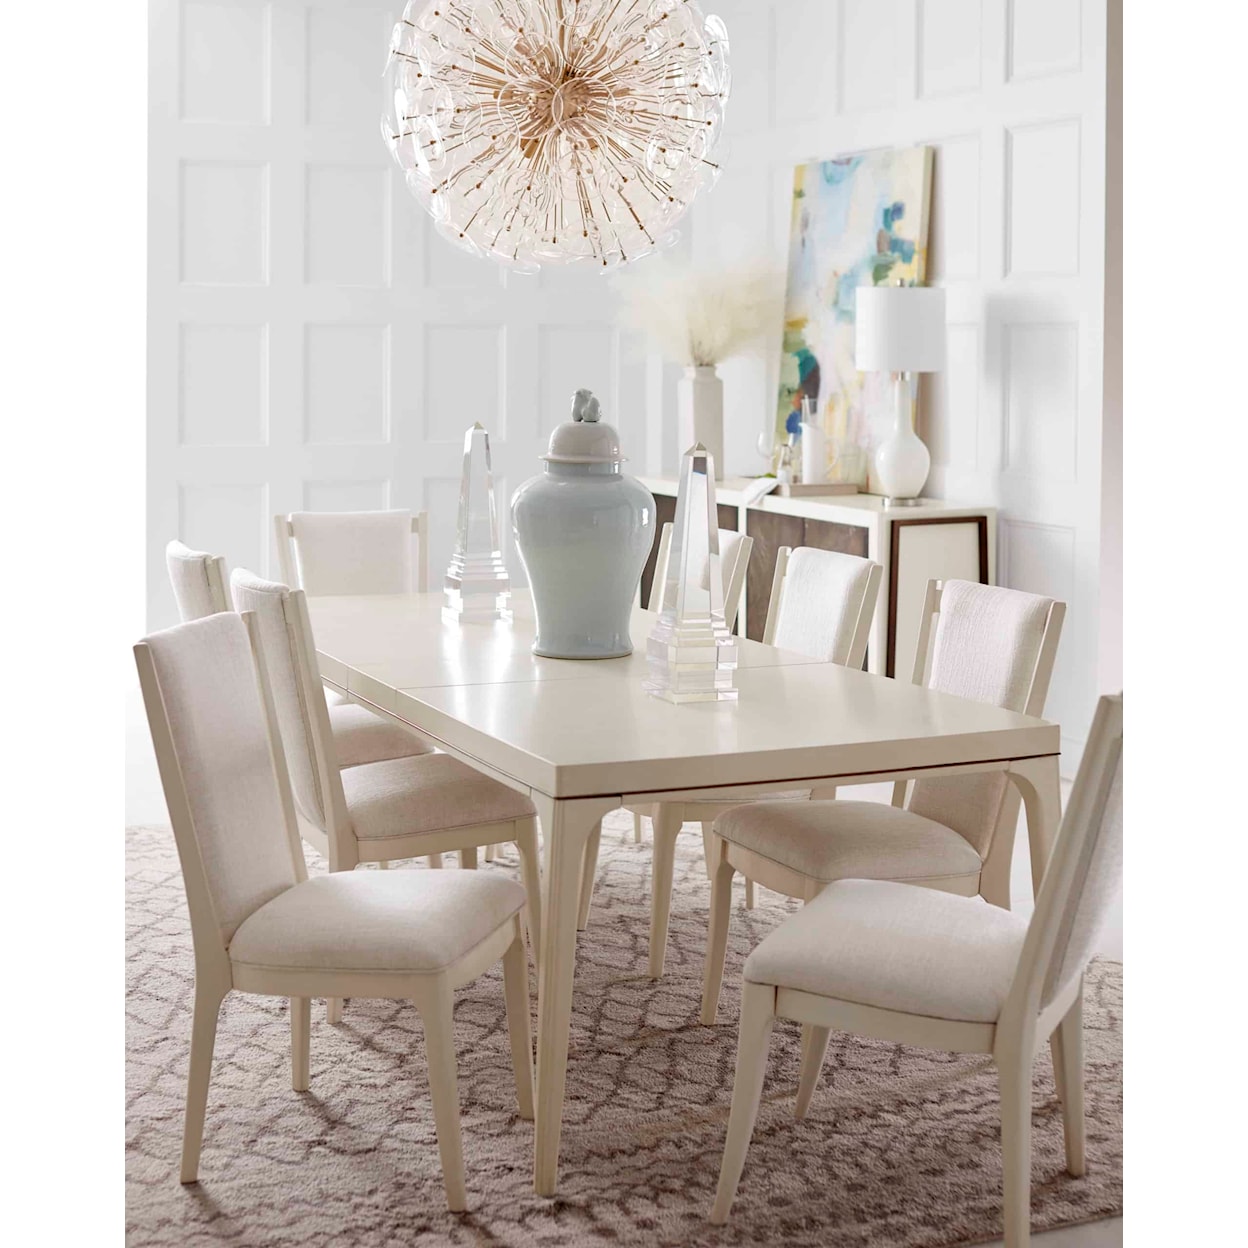 A.R.T. Furniture Inc Blanc Dining Table With Leafs